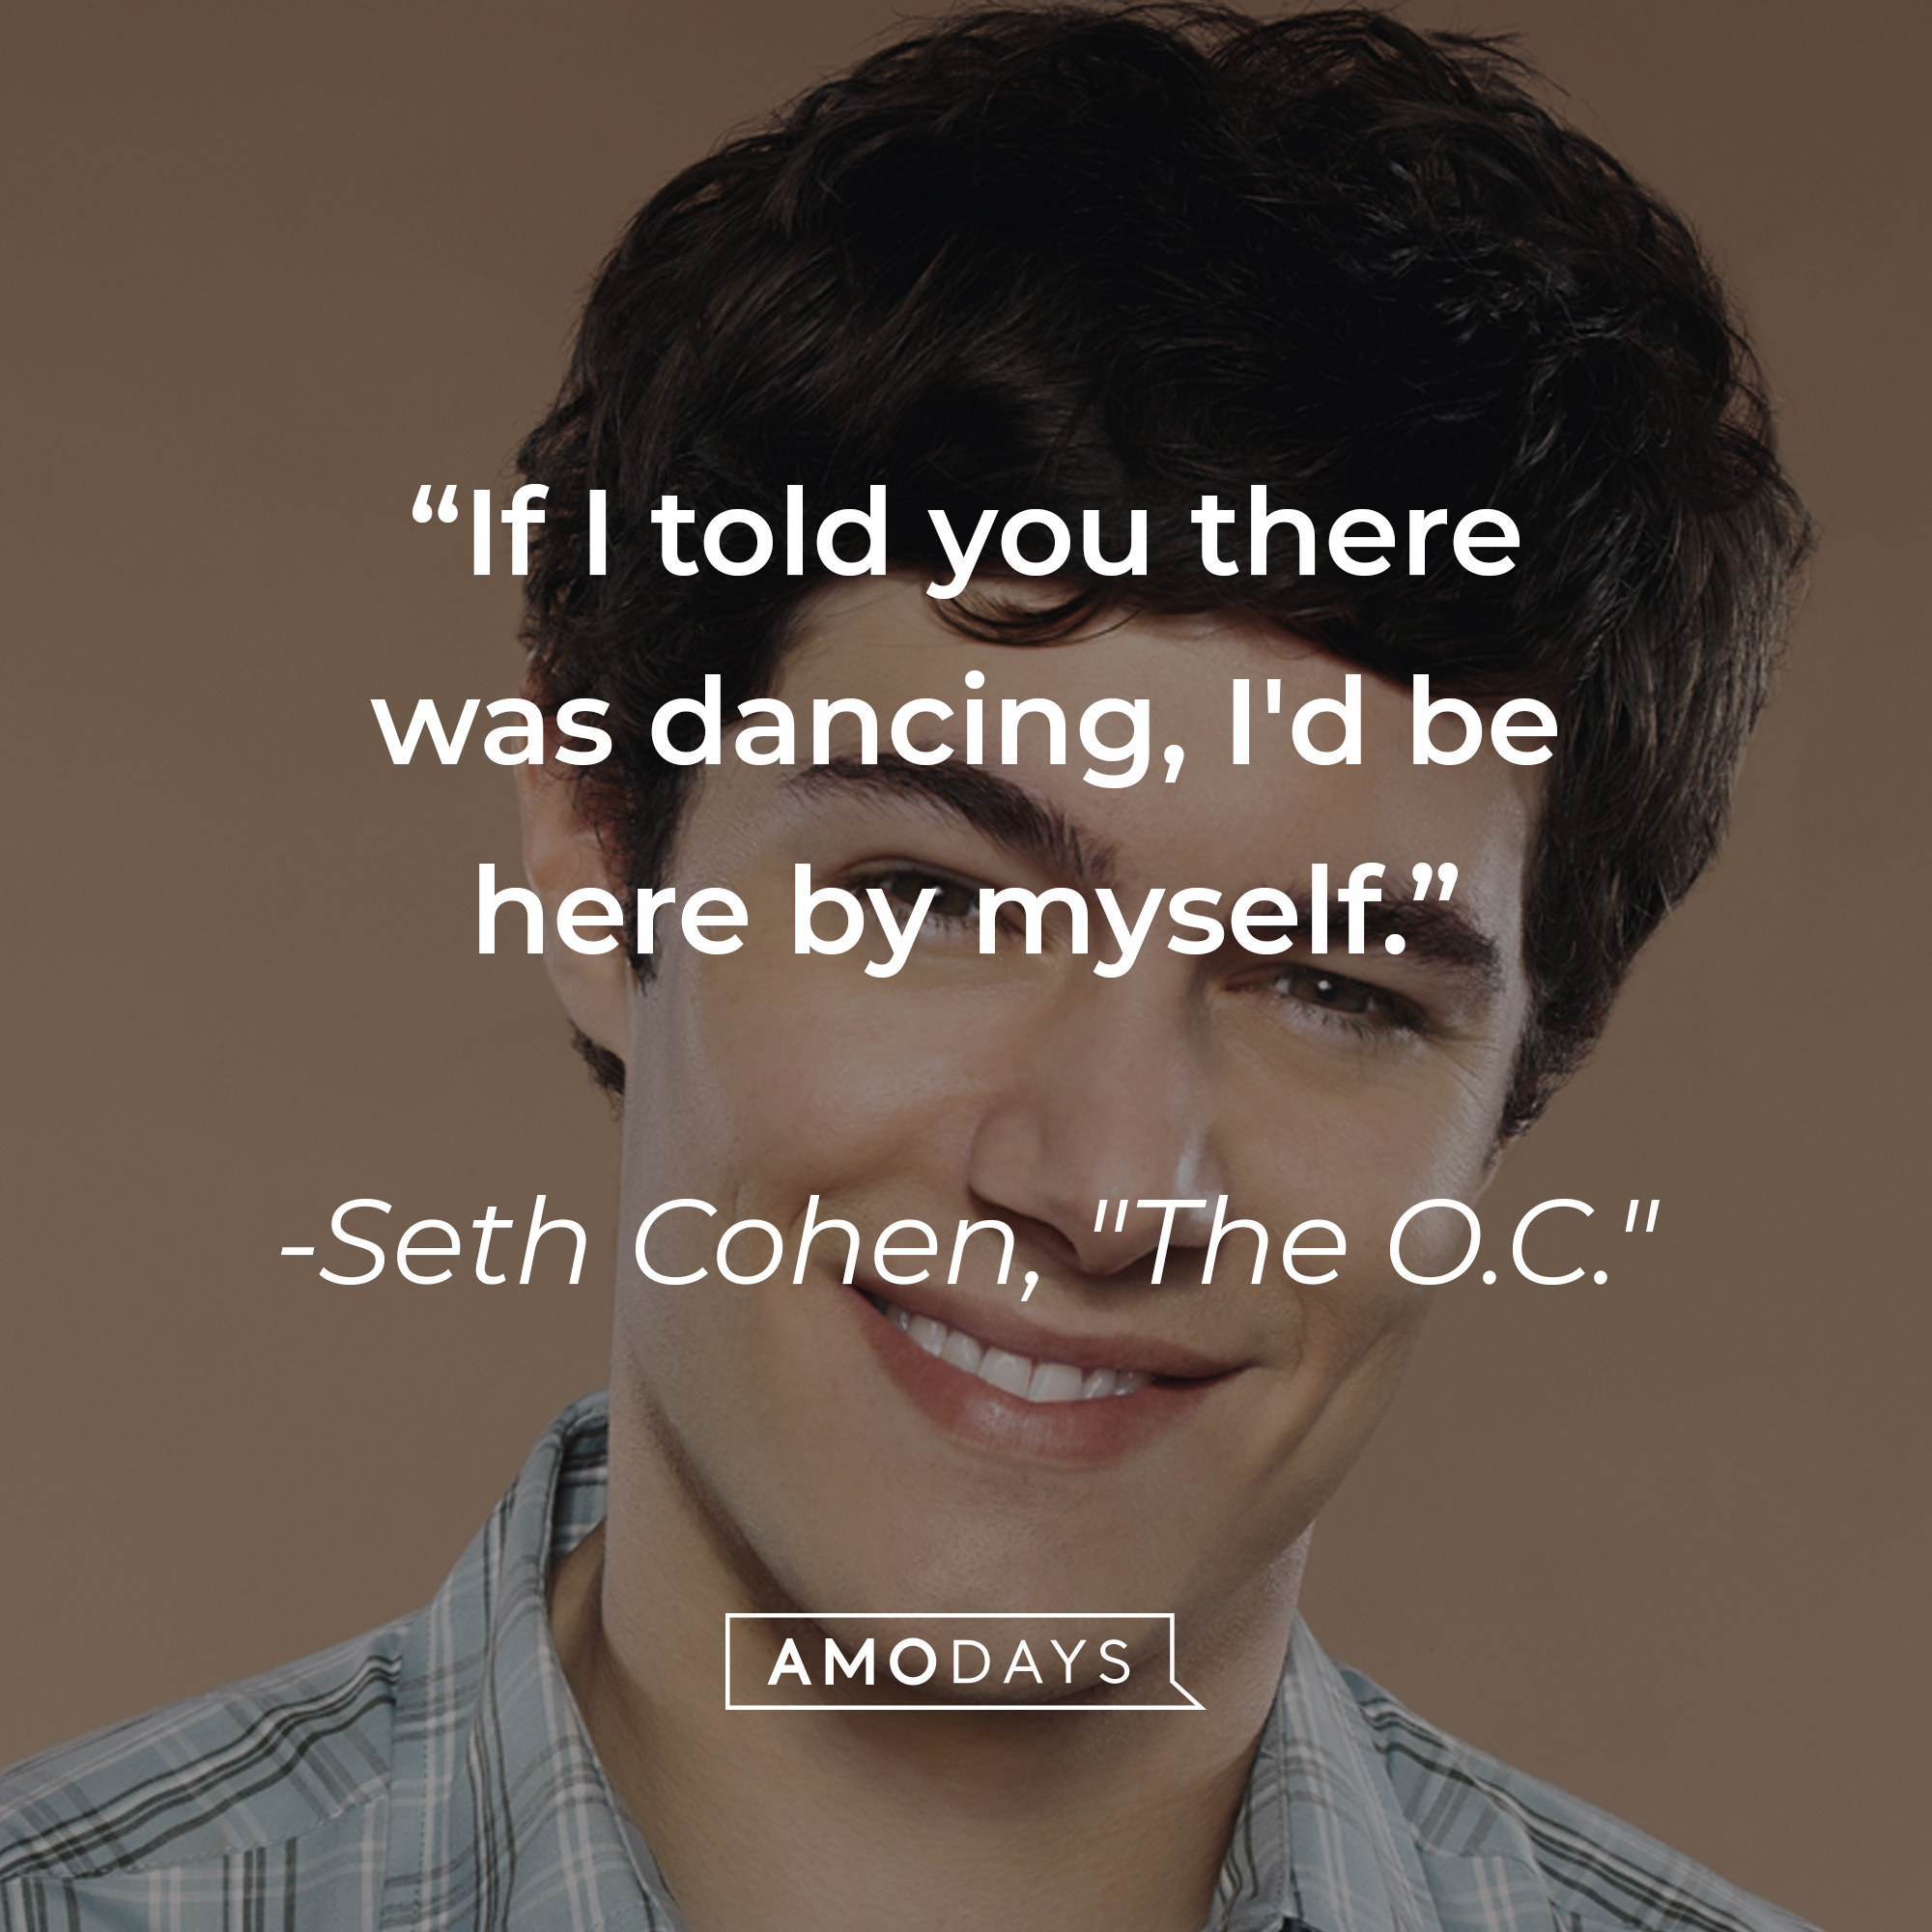 Seth Cohen's quote: "If I told you there was dancing, I'd be here by myself." | Source: Facebook.com/TheOC